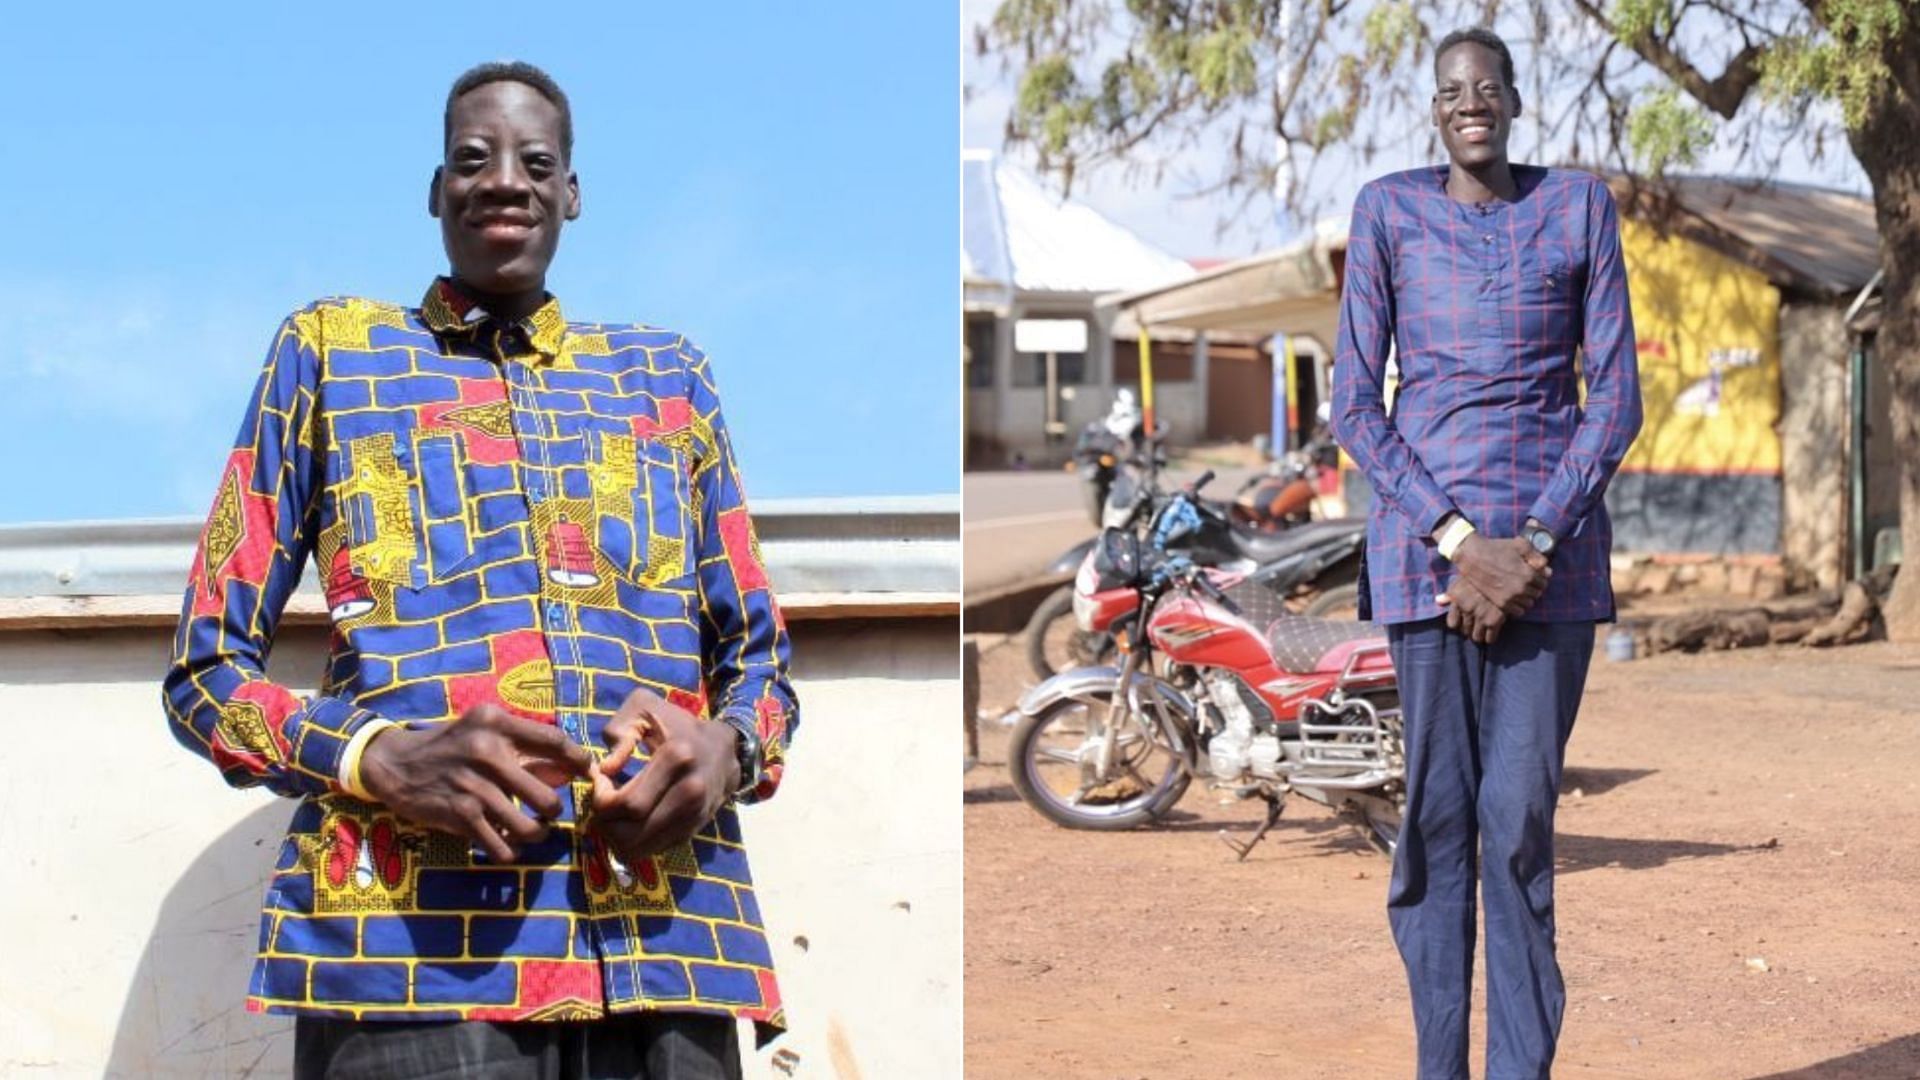 Ghana-native Sulemana Abdul Samed, who has gigantism, might snatch the world